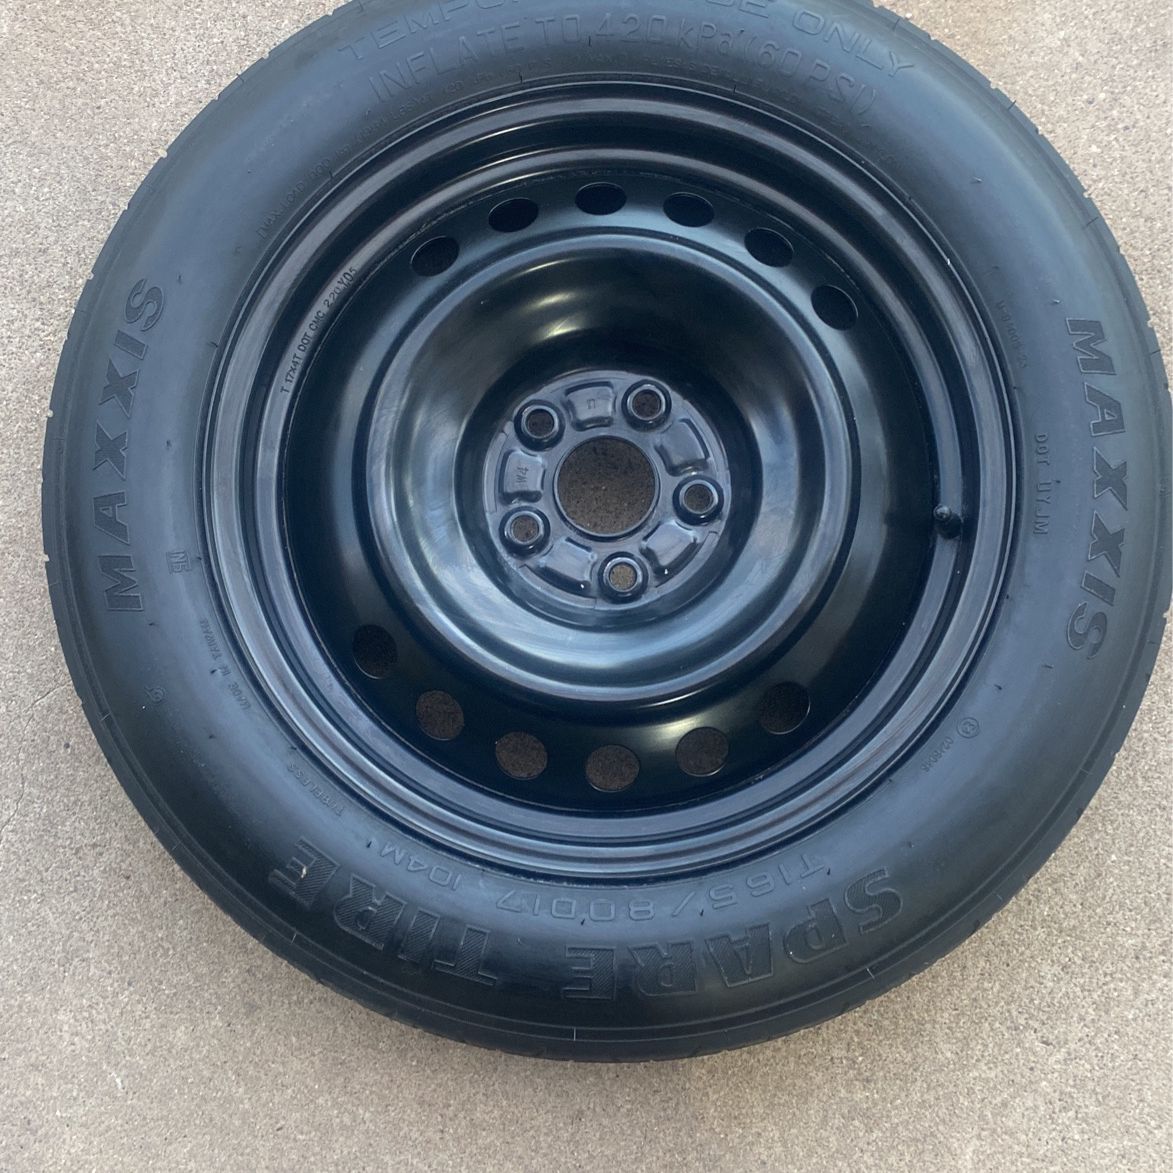 Maxxis T165/80D17 104m Spare Tire 